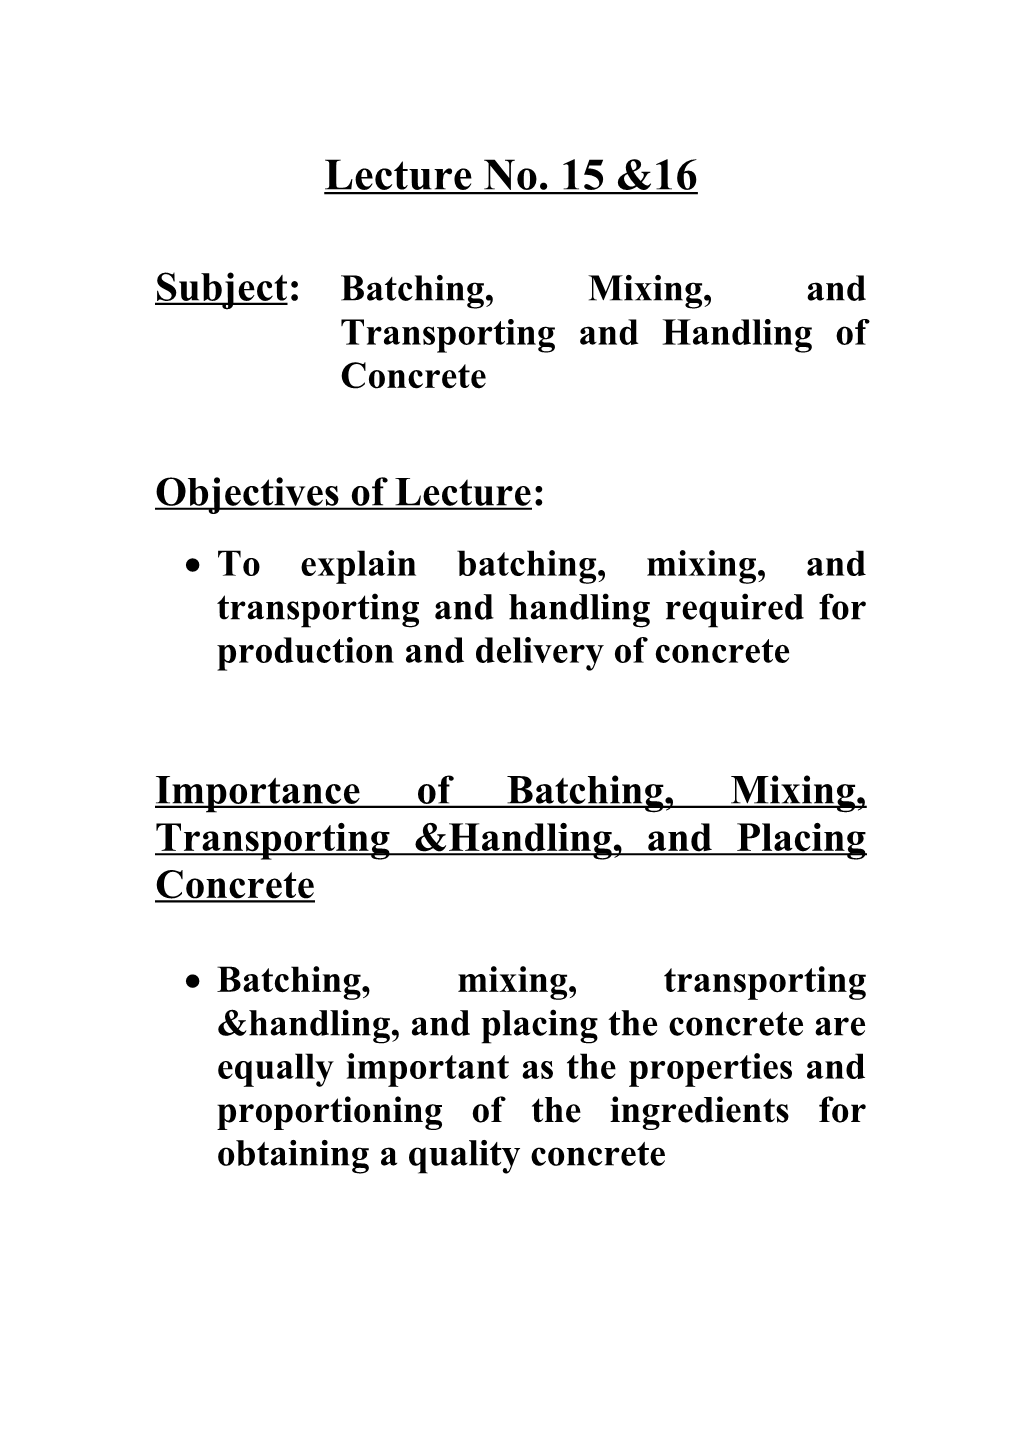 Subject:Batching, Mixing, and Transporting and Handling of Concrete